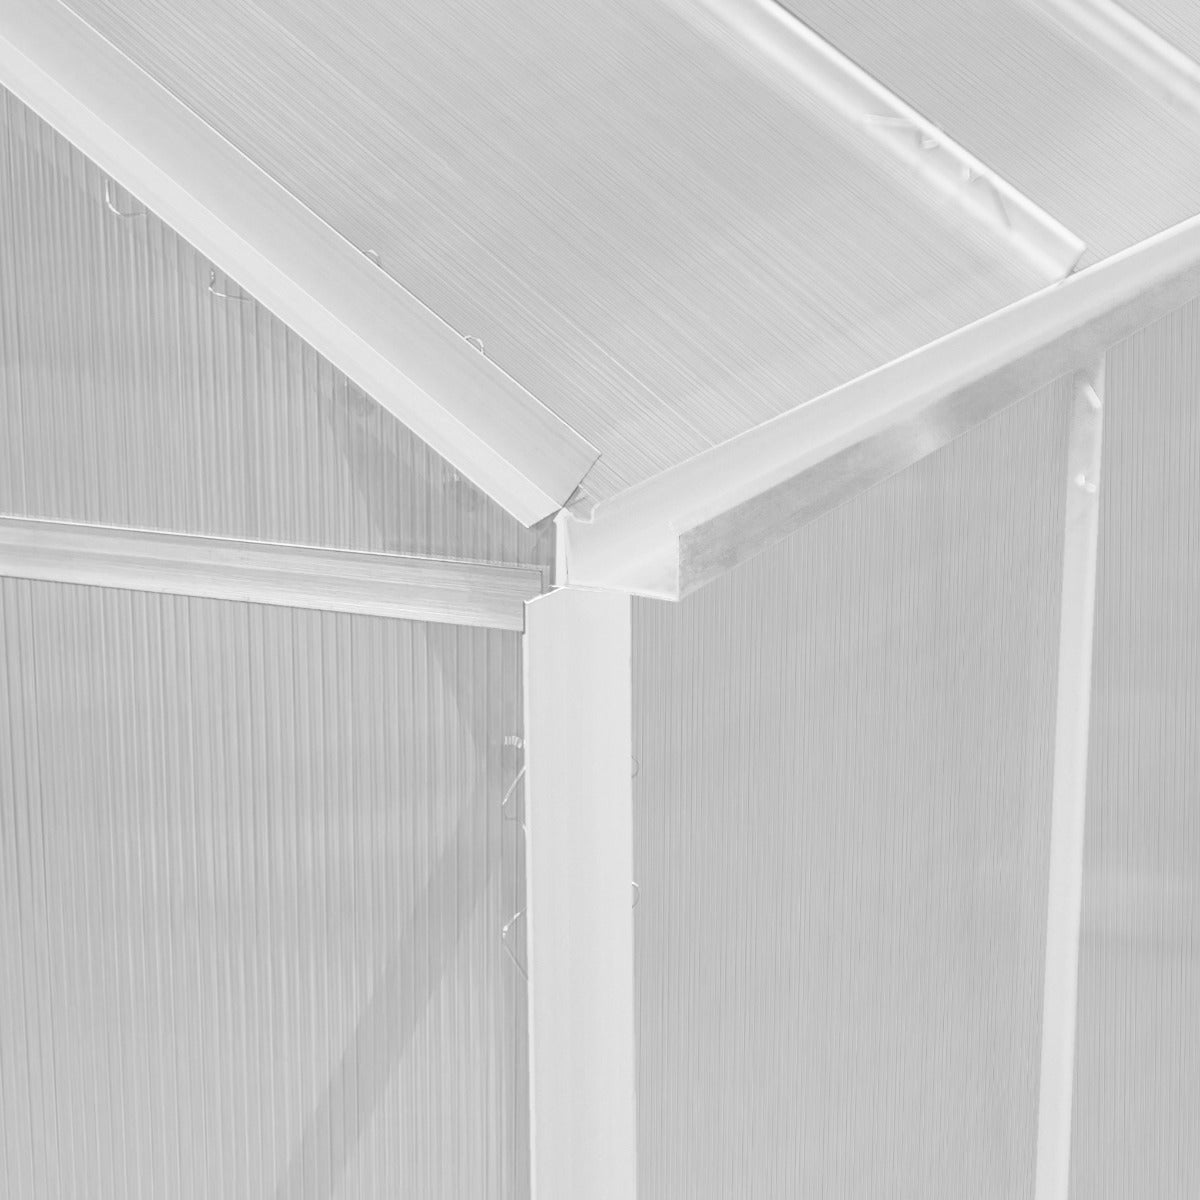 Polycarbonate Greenhouse 6ft x 8ft – Silver